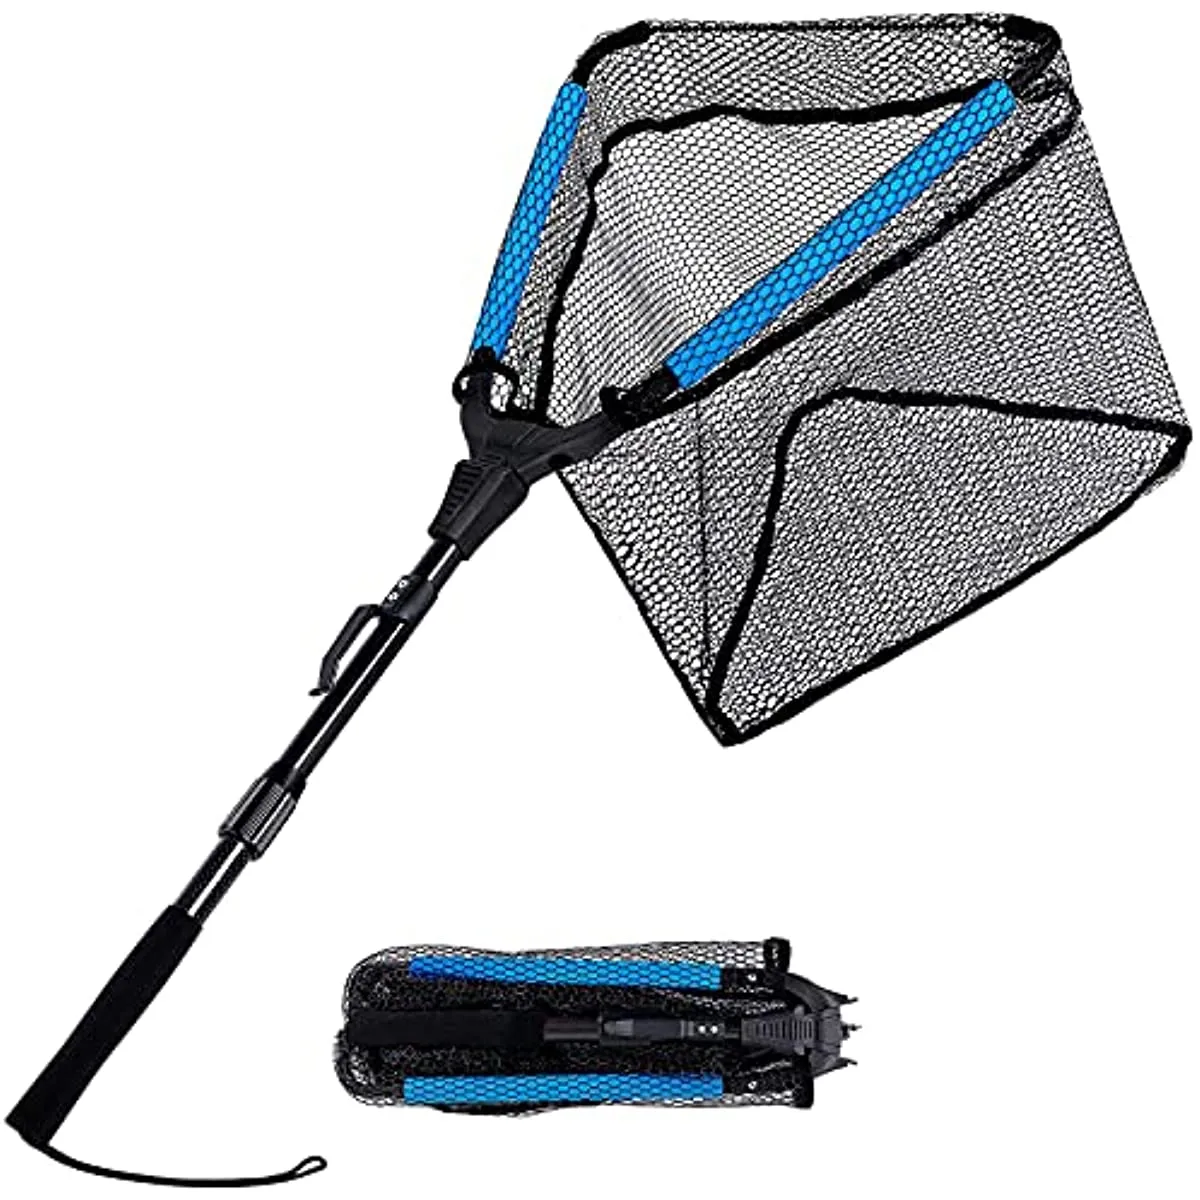 Fishing Net Fish Landing Net Foldable Collapsible Telescopic Pole Handle Durable Nylon Material Mesh Safe Fish Catching or Releasing